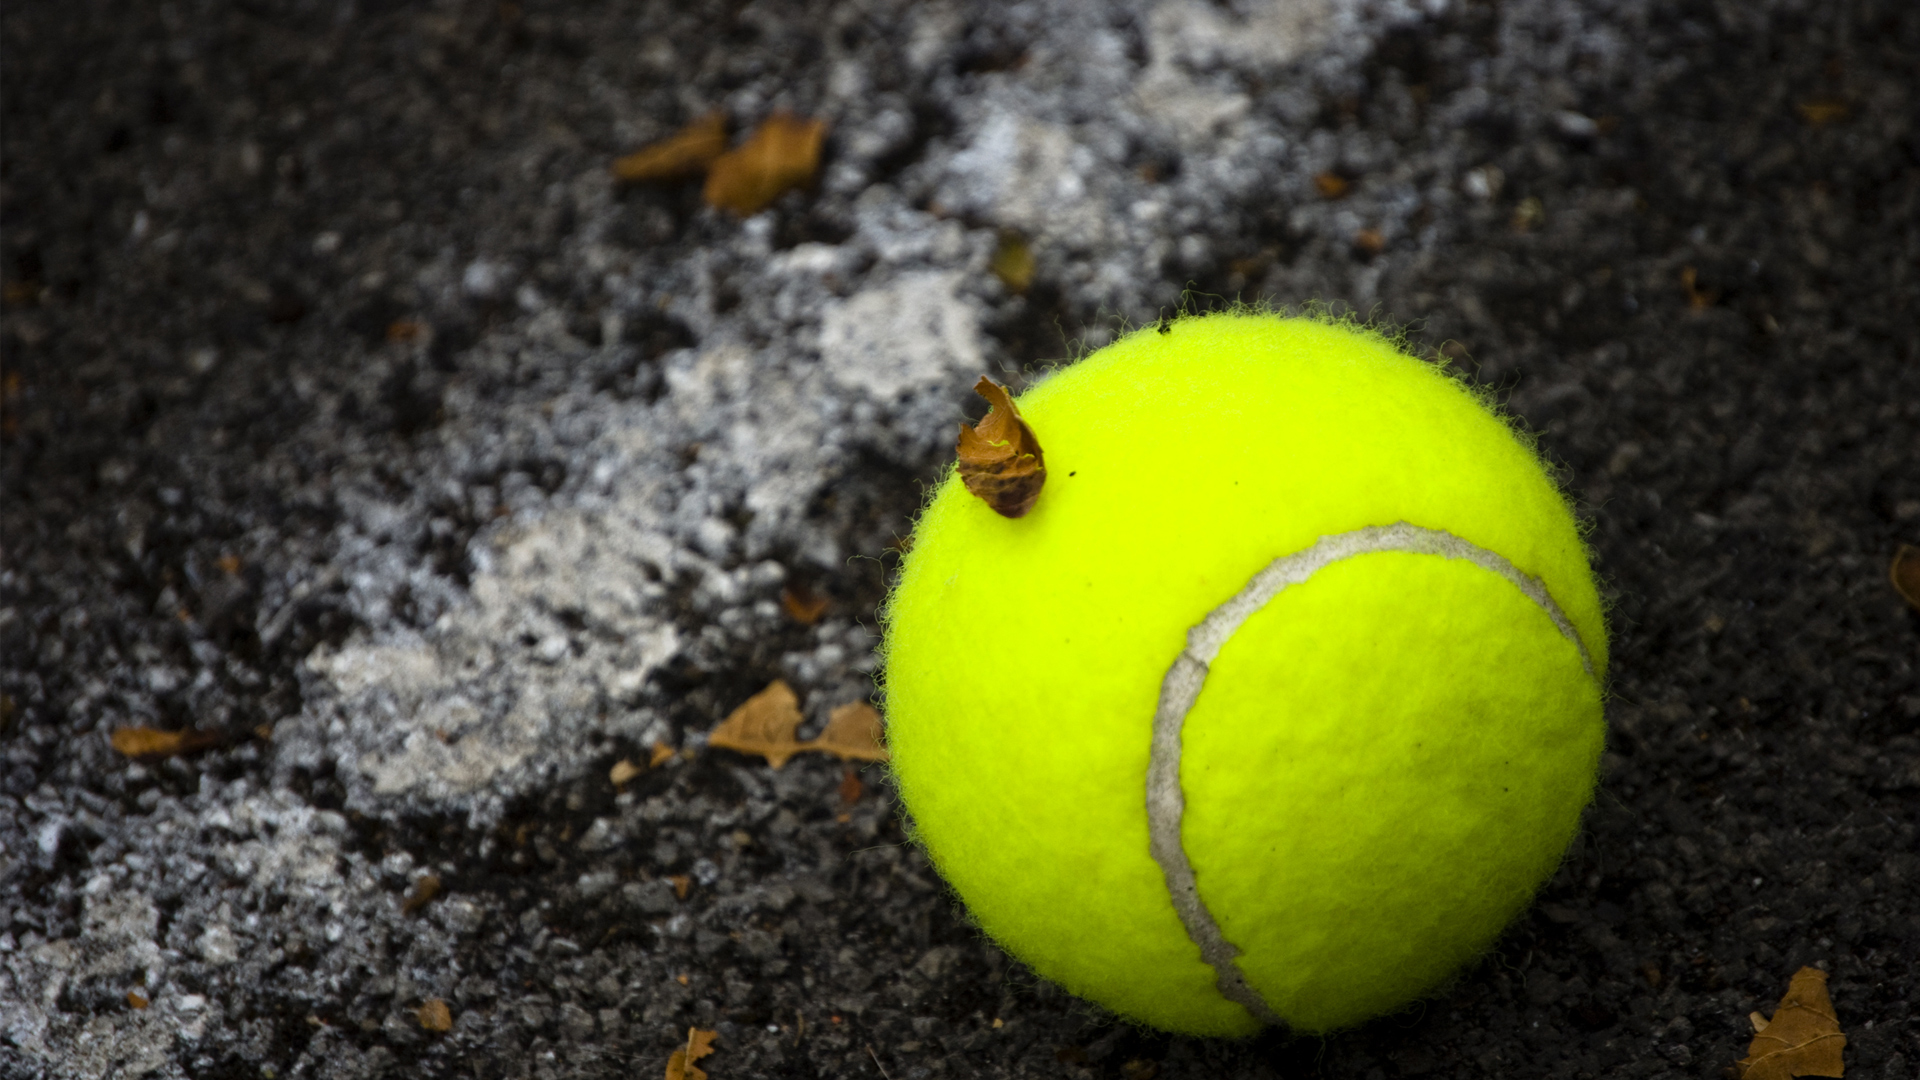 Tennis today 21.09. Schedule, Predictions & Betting Tips